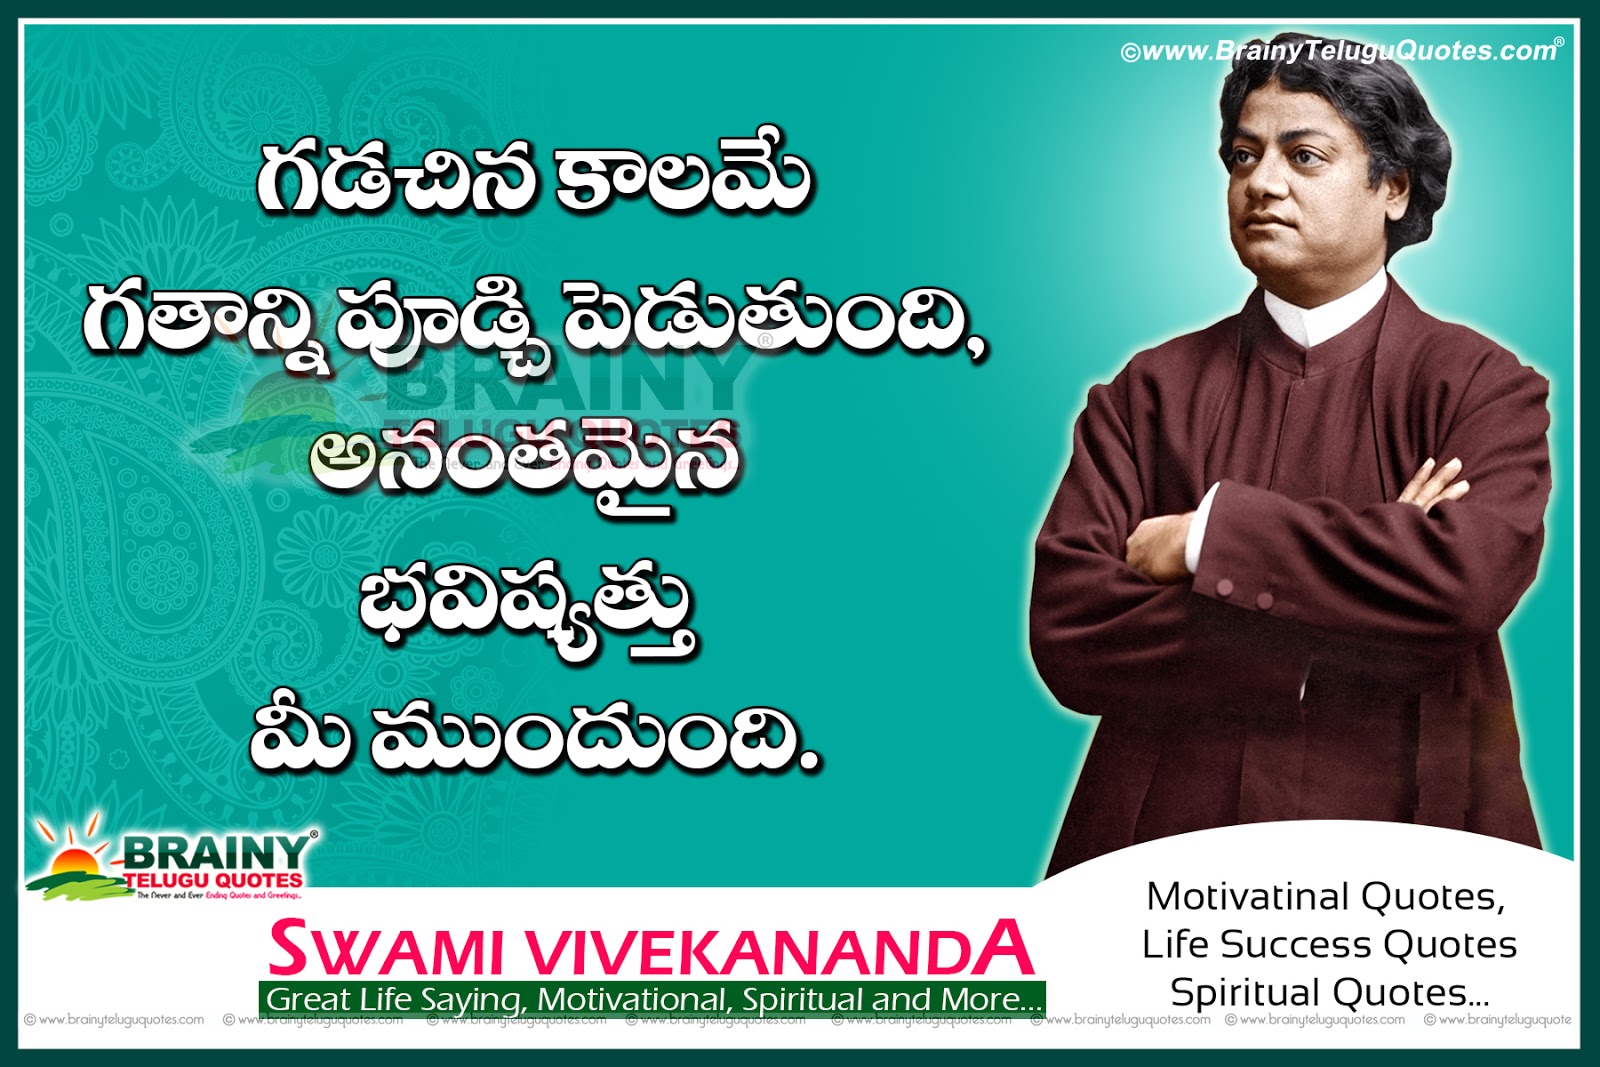 Here is a Telugu Language Life Goal ettings Quotes and Messages by Swami Vivekananda Famous